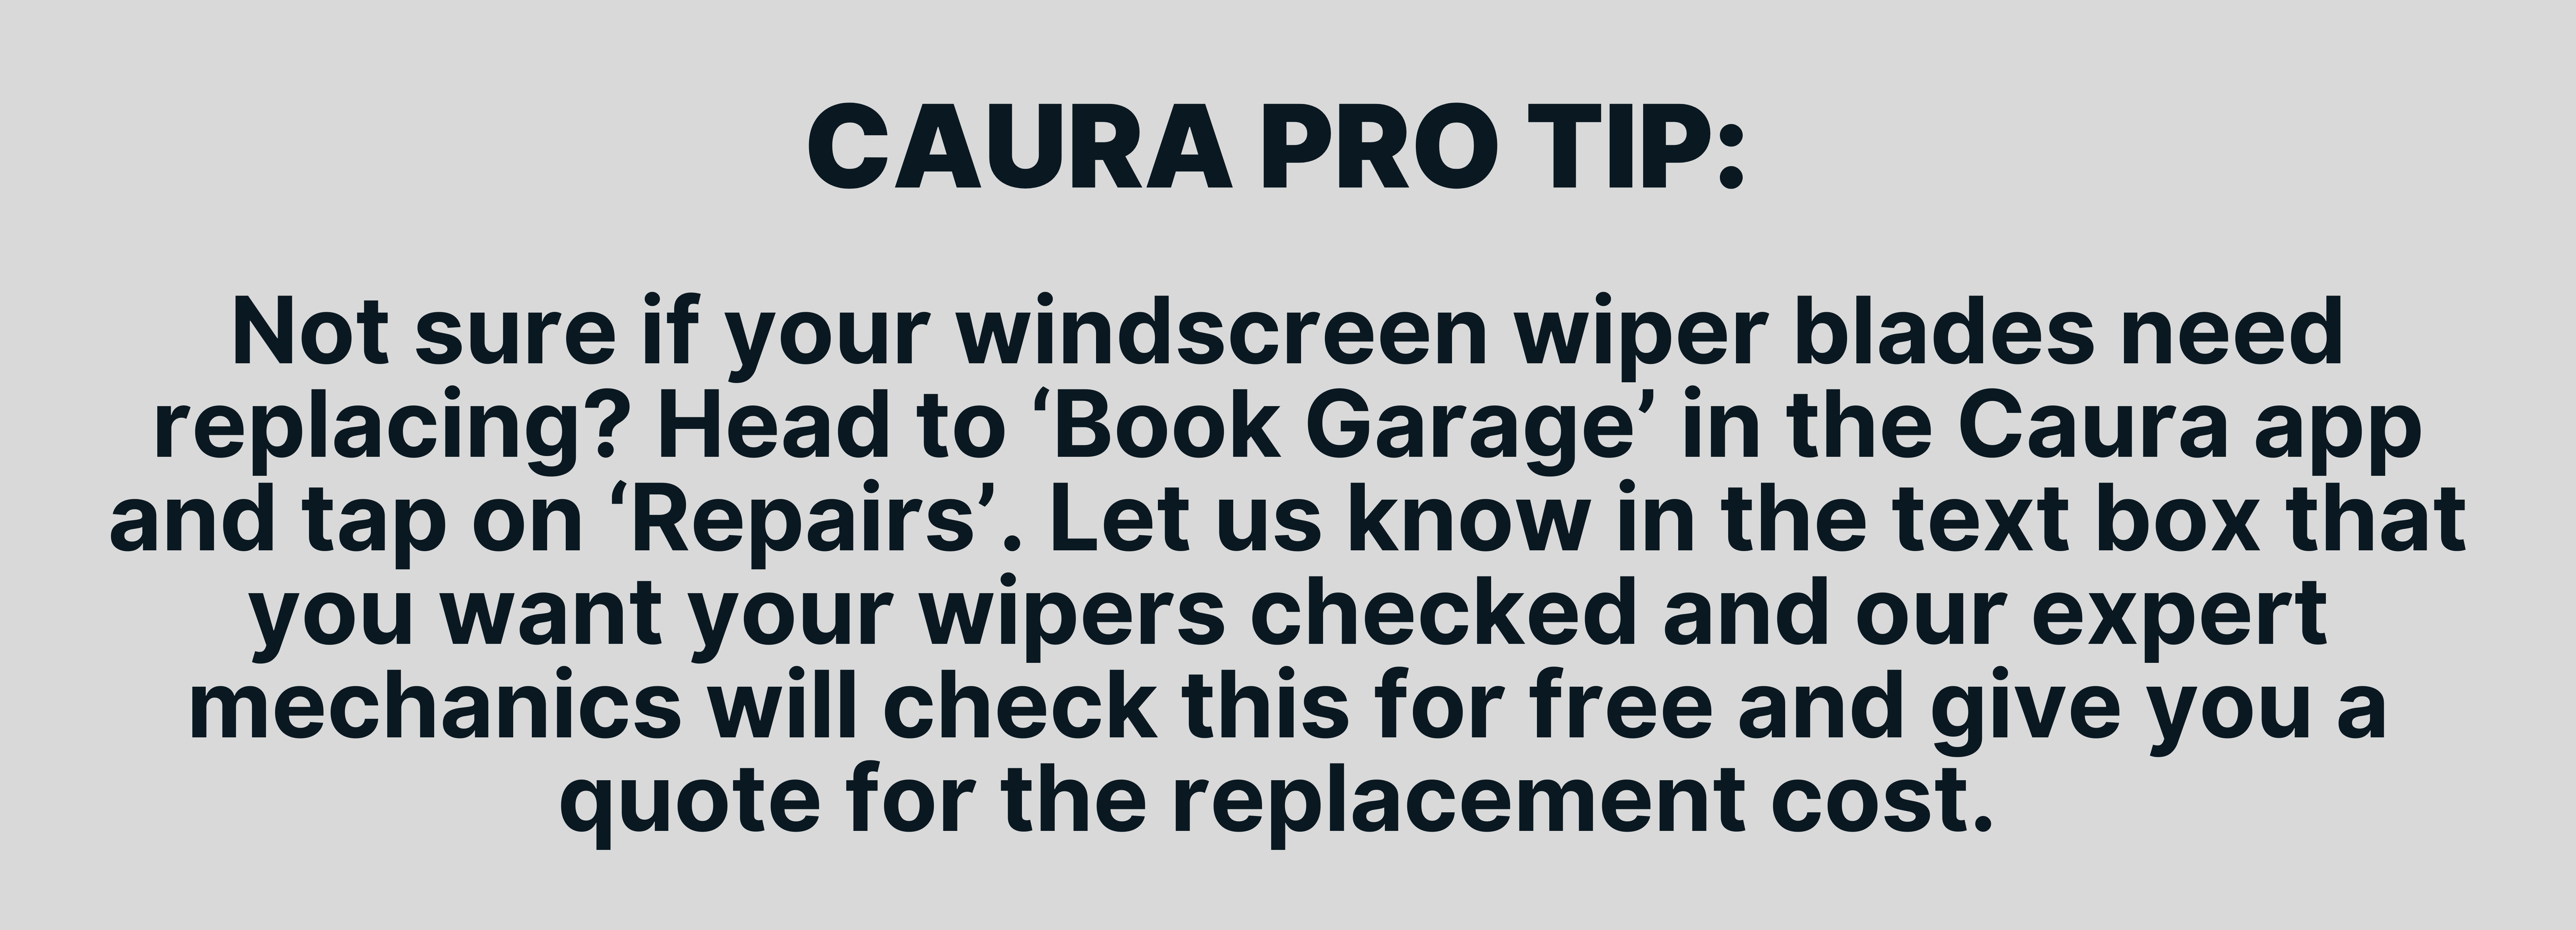 Not sure if your windscreen wiper blades need replacing? Head to ‘Book Garage’ in the Caura app and tap on ‘Repairs’. Let us know in the text box that you want your wipers checked and our expert mechanics will check this for free and give you a quote for the replacement cost. 